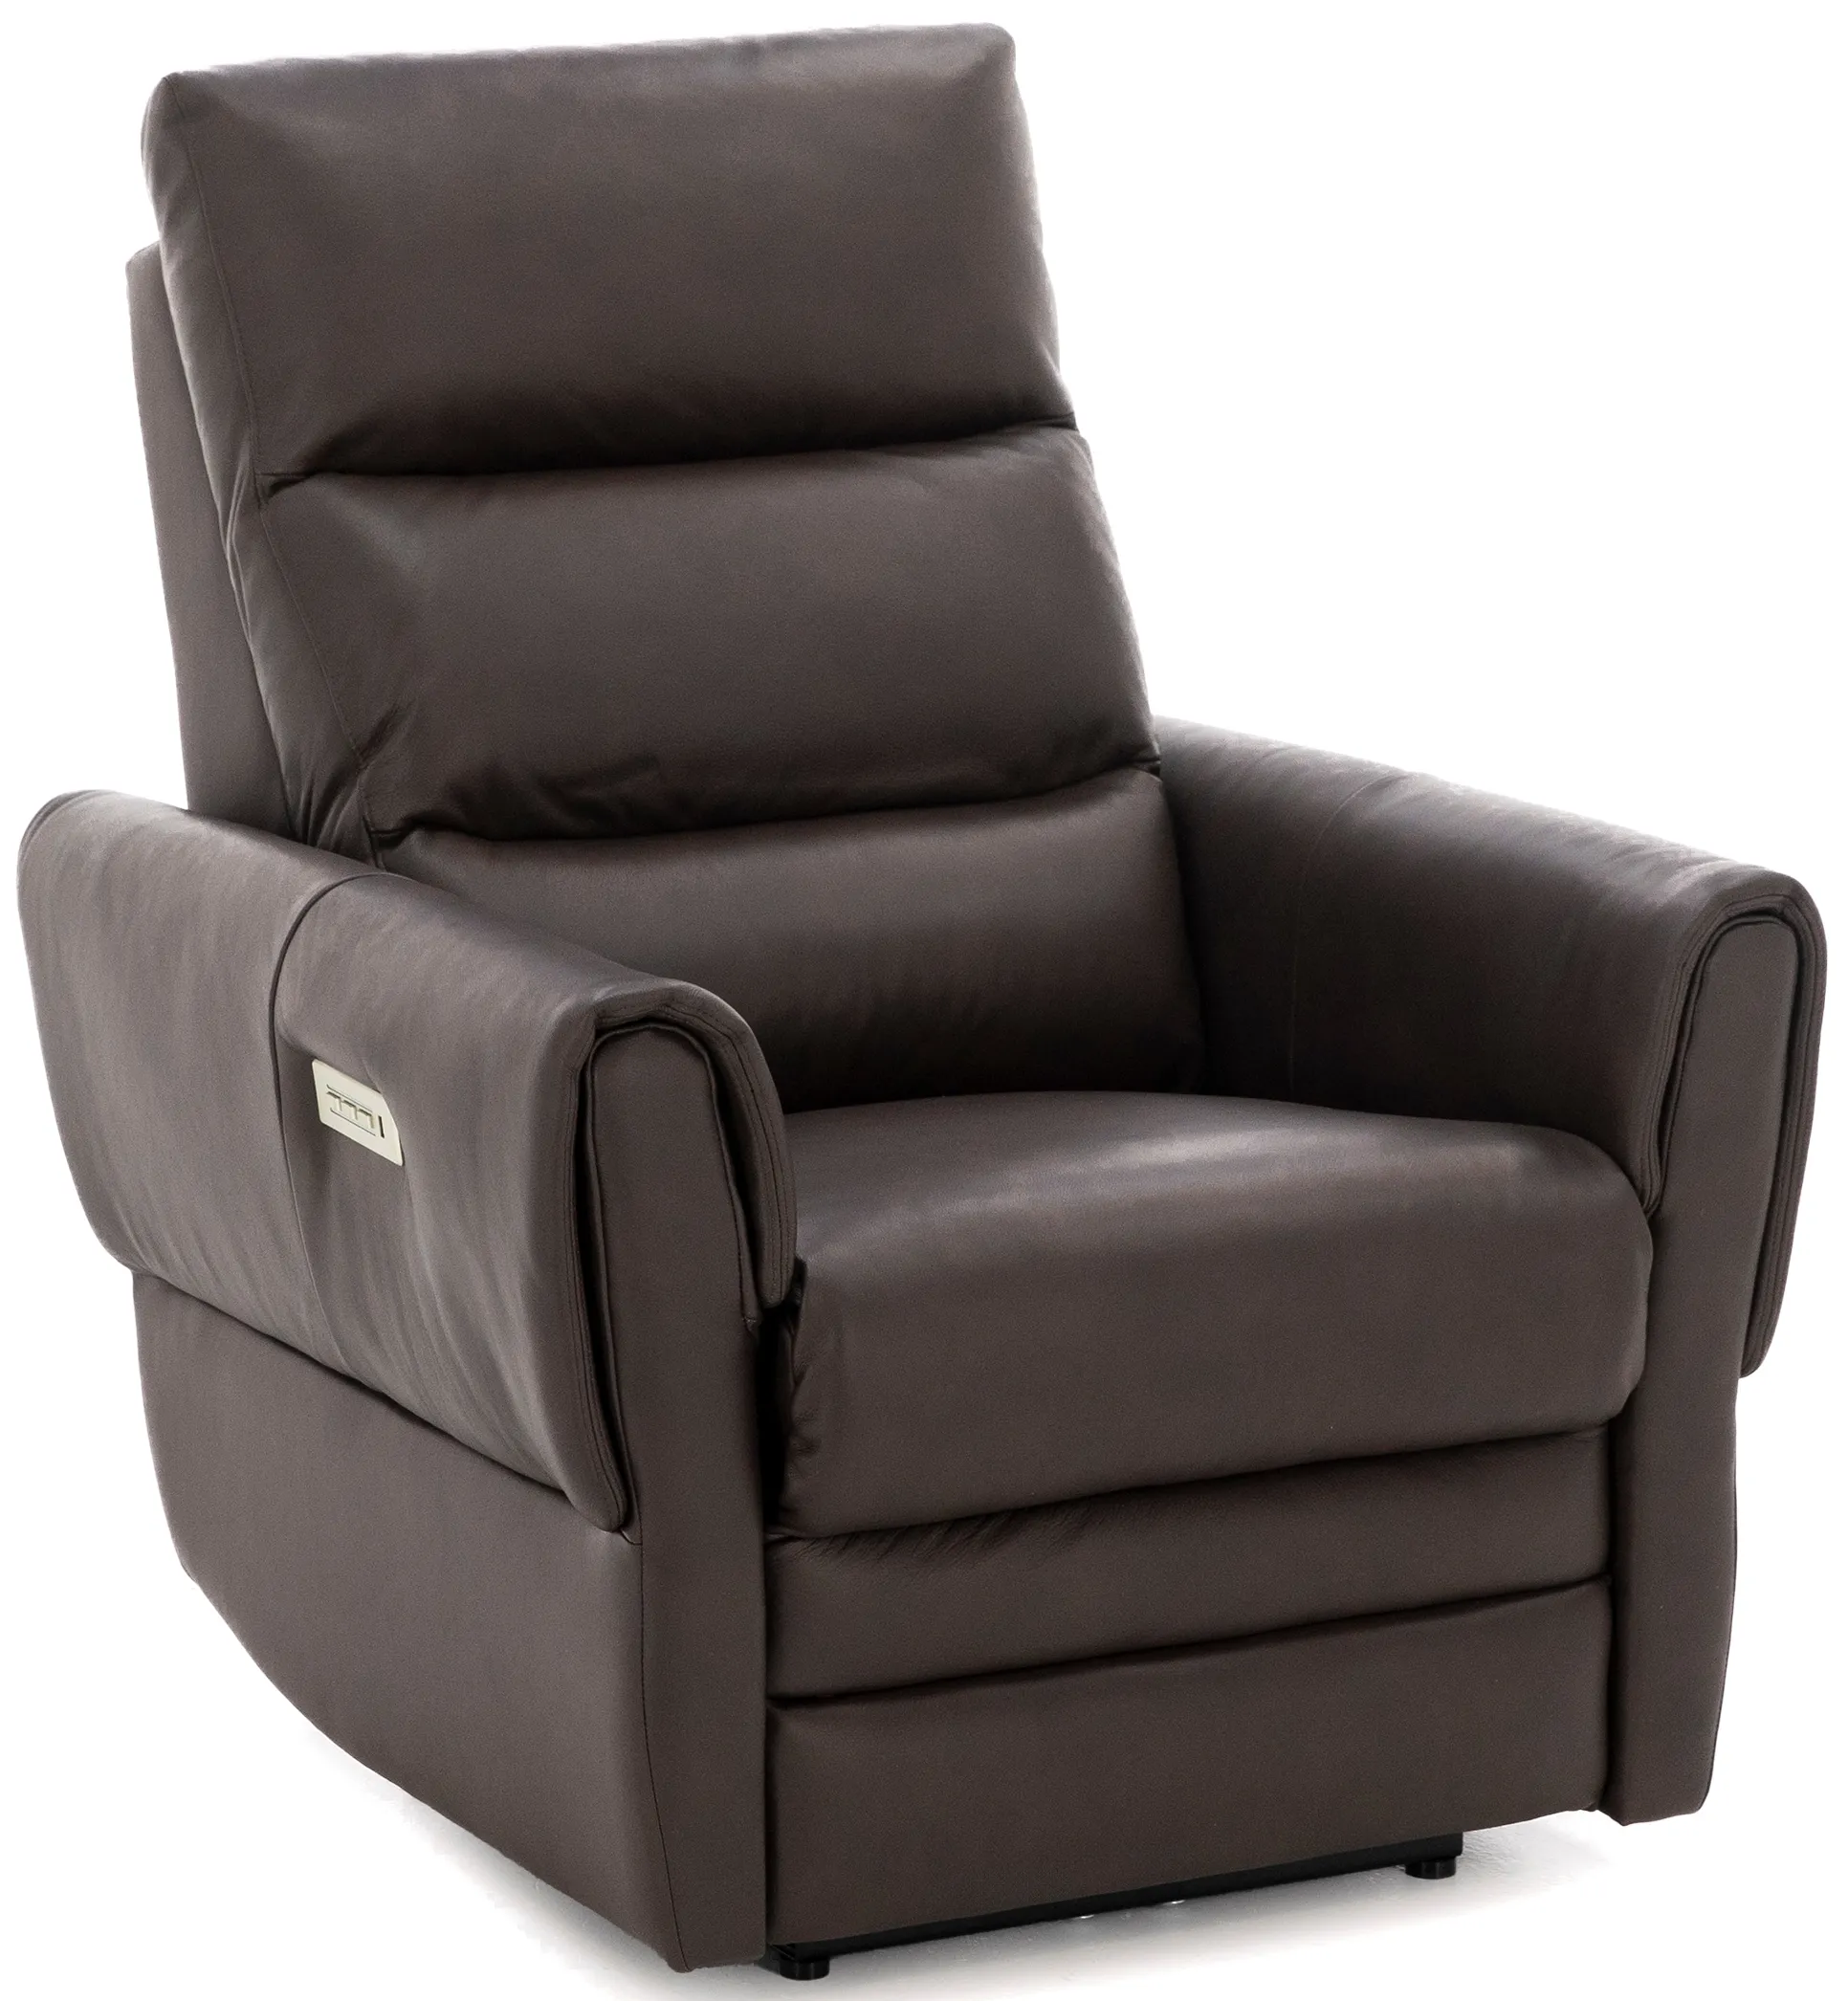 Bellavista Leather Fully Loaded Wall Saver Recliner